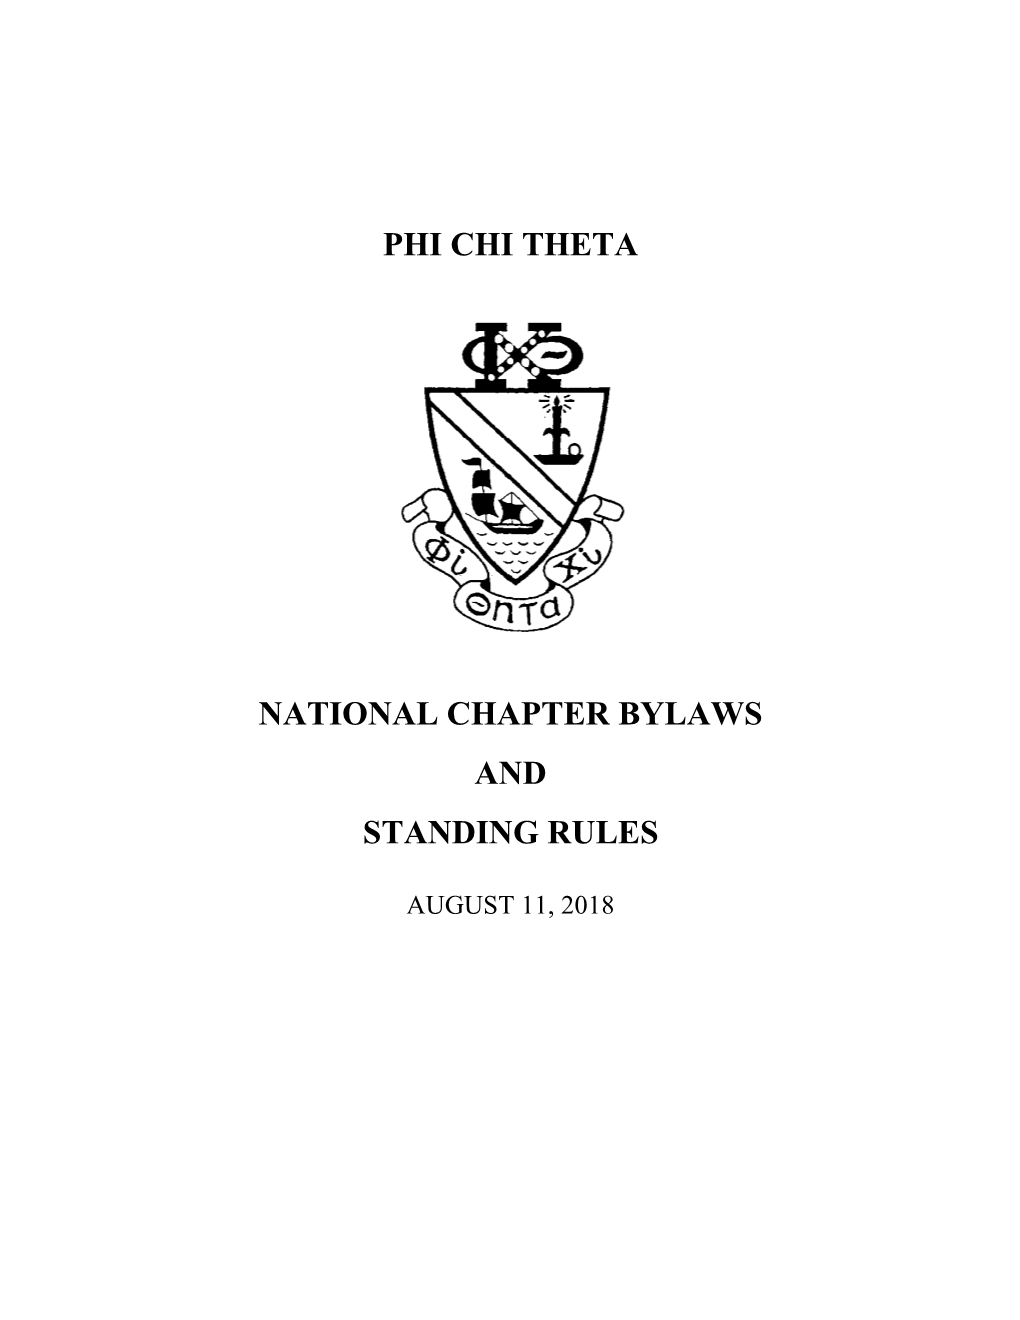 Phi Chi Theta National Chapter Bylaws and Standing Rules